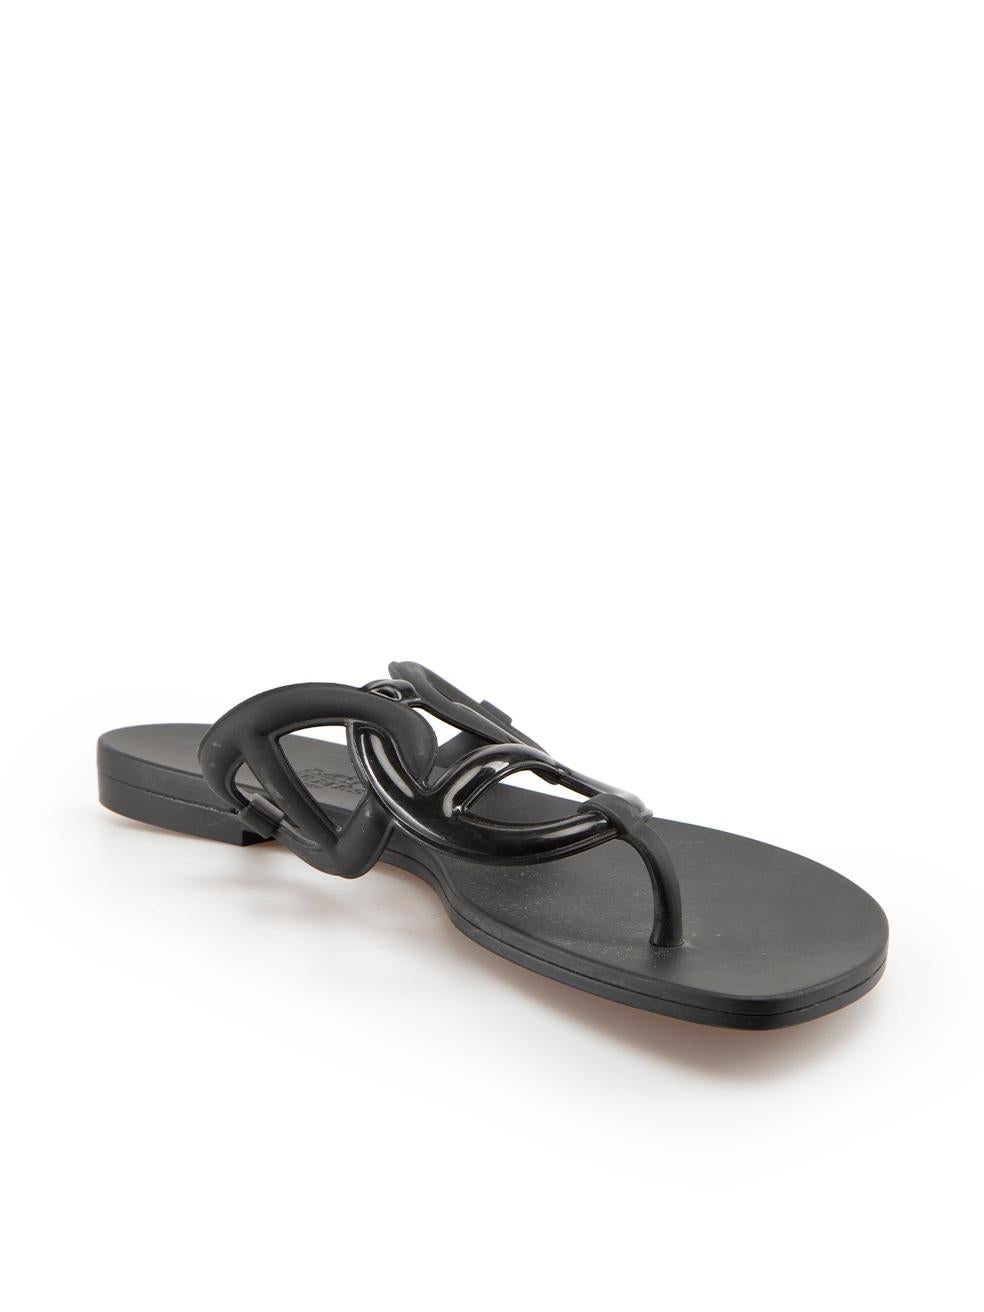 CONDITION is Very good. Minimal wear to sandals is evident. Minimal wear to both shoe thong straps with light abrasions on this used Herm√®s designer resale item. These shoes come with dust bags.
 
Details
Egerie Jelly
Black
Rubber
Thong